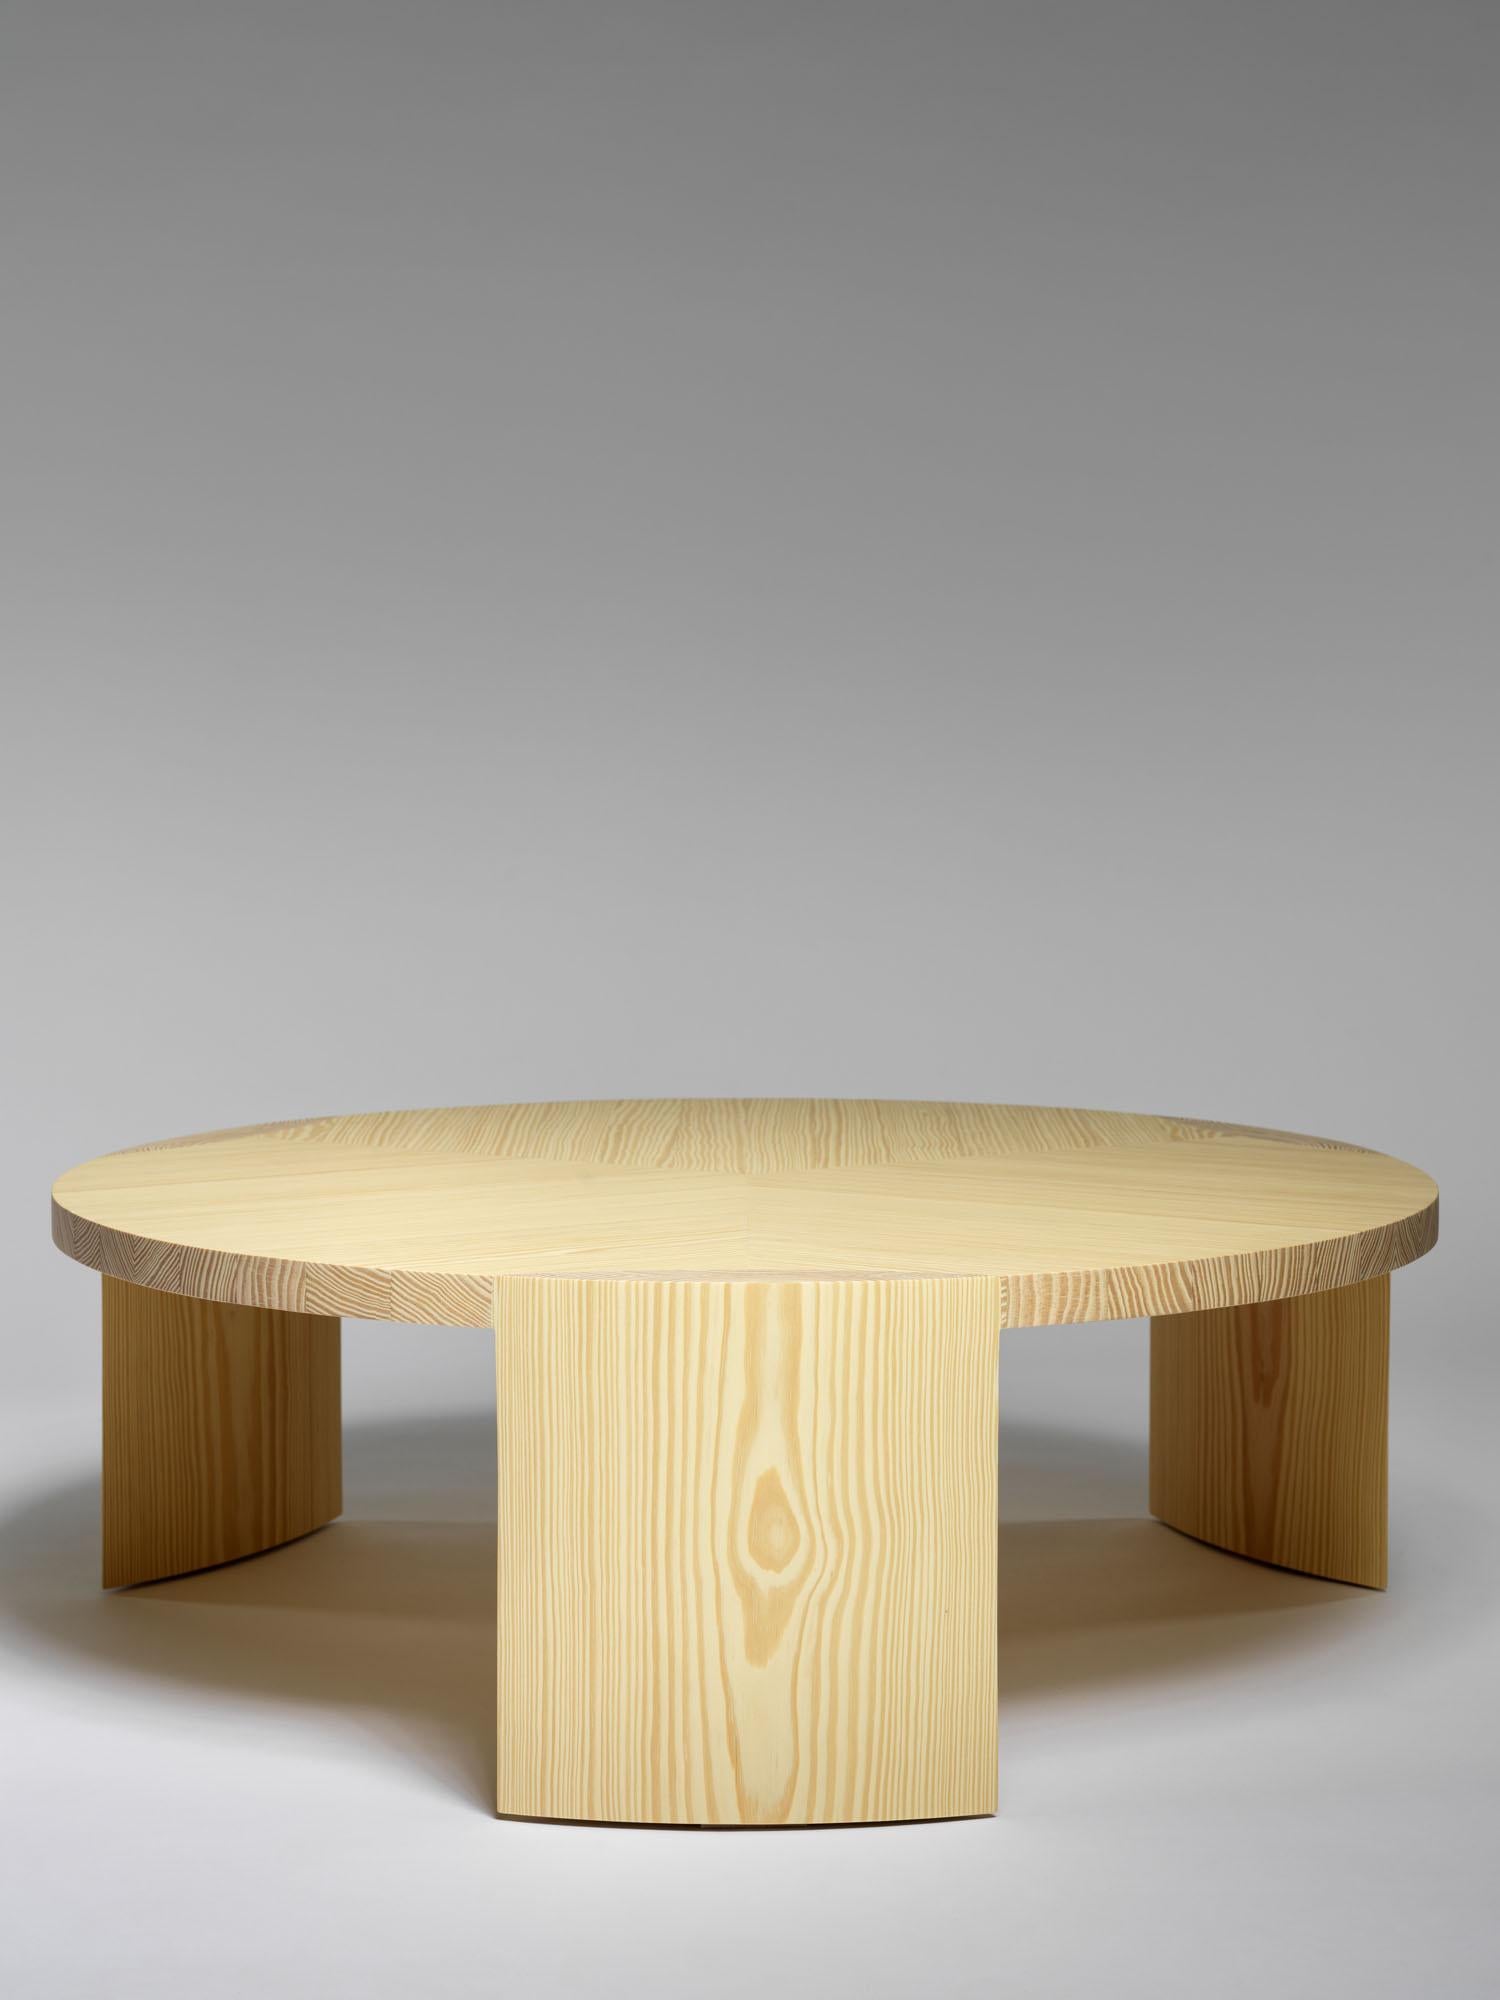 Nort coffee table by Tim Vranken
Materials: Yellow pine
Dimensions: D 90 x H 30 cm

Tim Vranken is a Belgian furniture designer who focuses on solid, handmade furniture. Throughout his designs the use of pure materials and honest natural